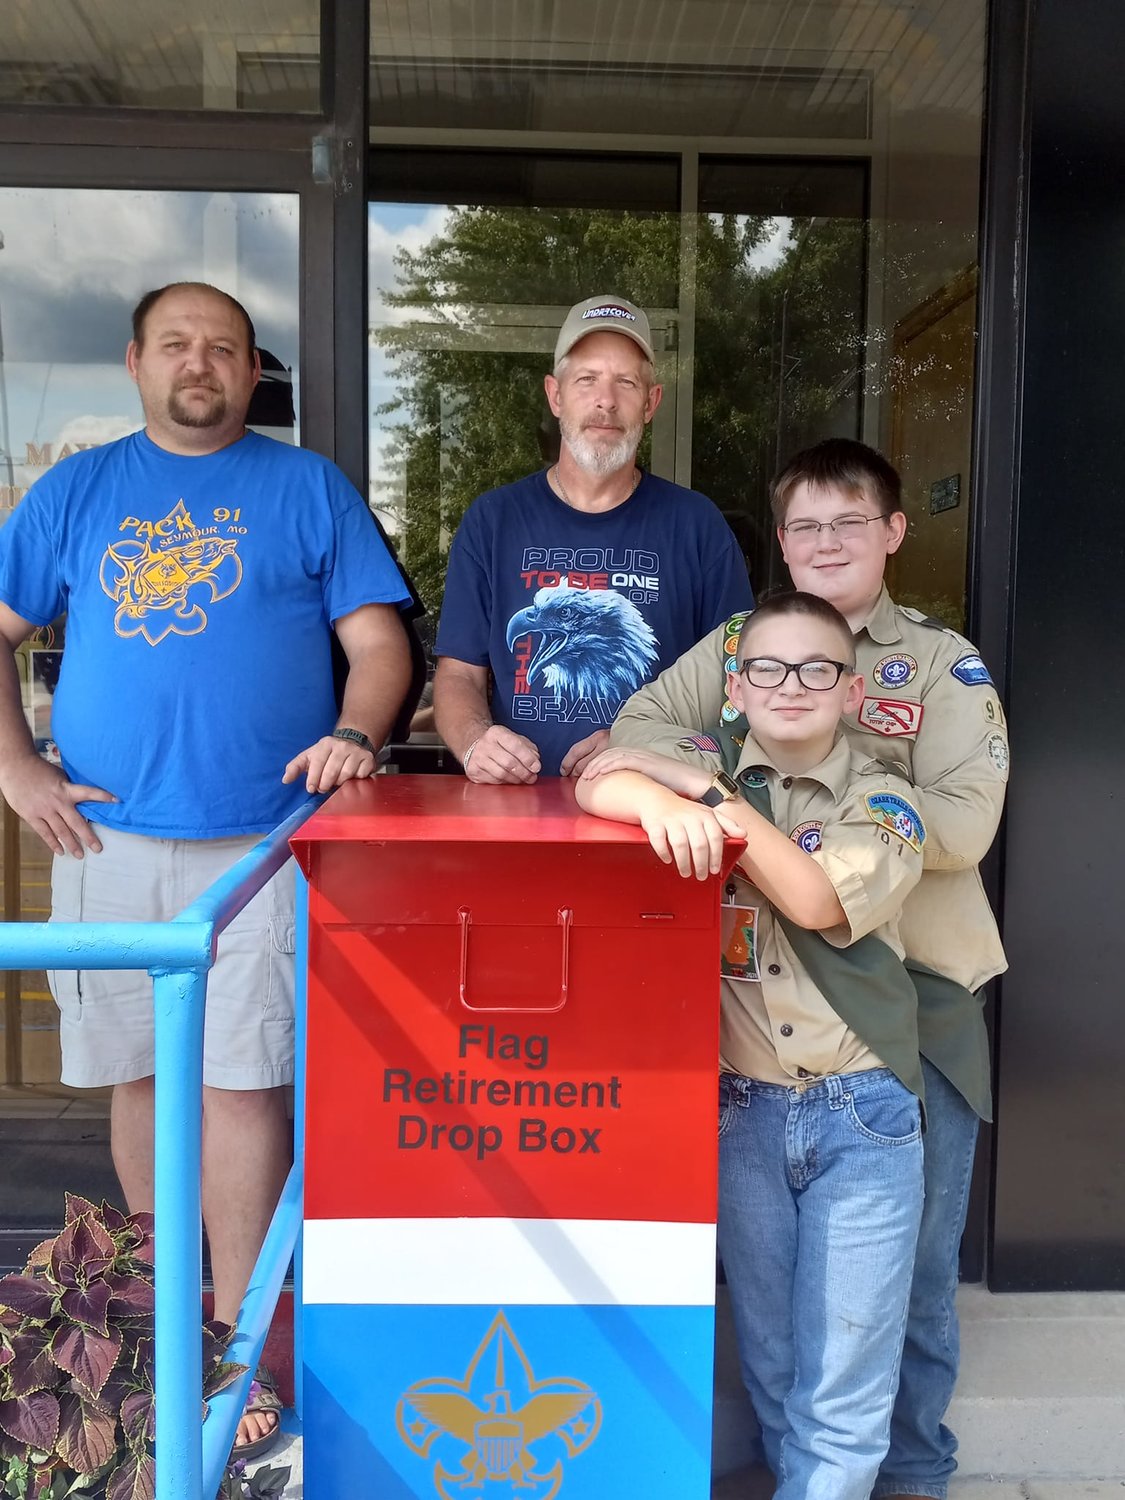 Scout Master for Troop 91B Richard Bell (left) stands with James Gagne (right) and his two scouts, Vaughn and Scot Gagne, with one of the two new retired flag drop boxes. Bell shares how the idea came to him, “I had seen that many different Scout Troops across the country have set up drop boxes for retired flags…So I thought this would be simpler for everybody involved.”